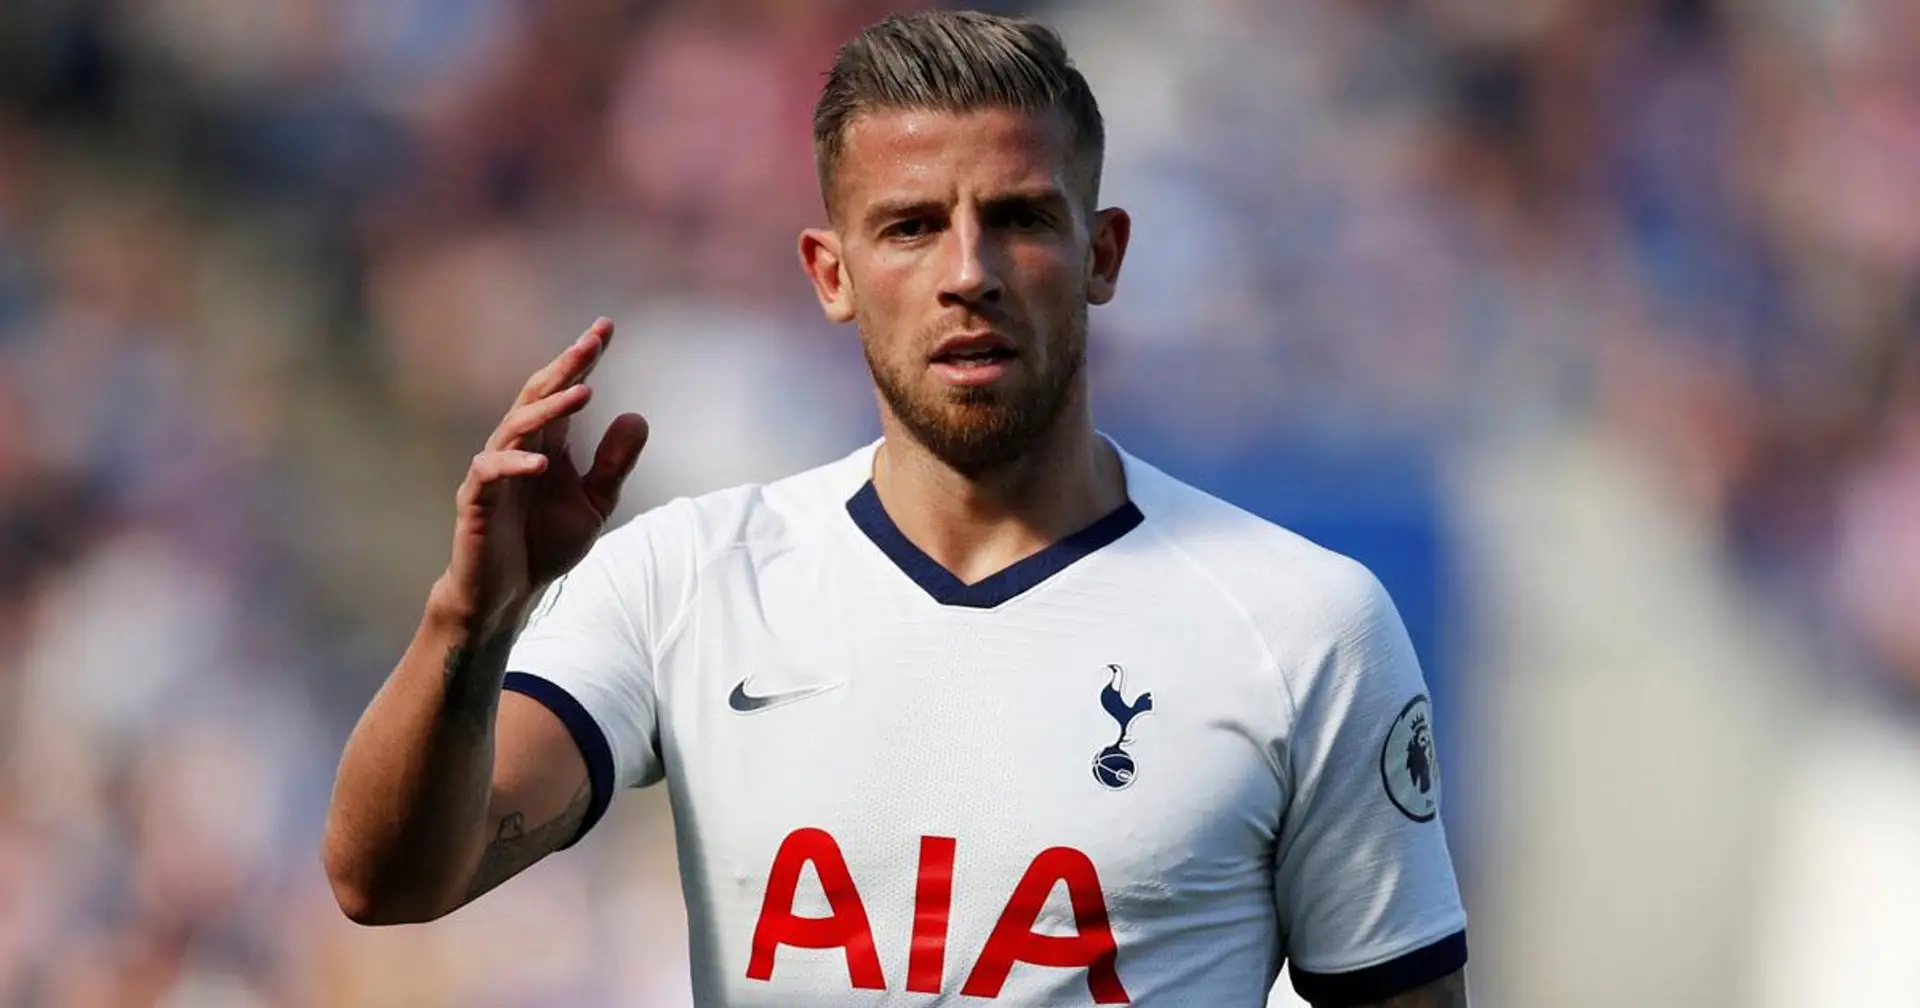 Toby Alderweireld hopes to 'bring just a little bit of joy' after donating tablets to hospitals amid coronavirus crisis